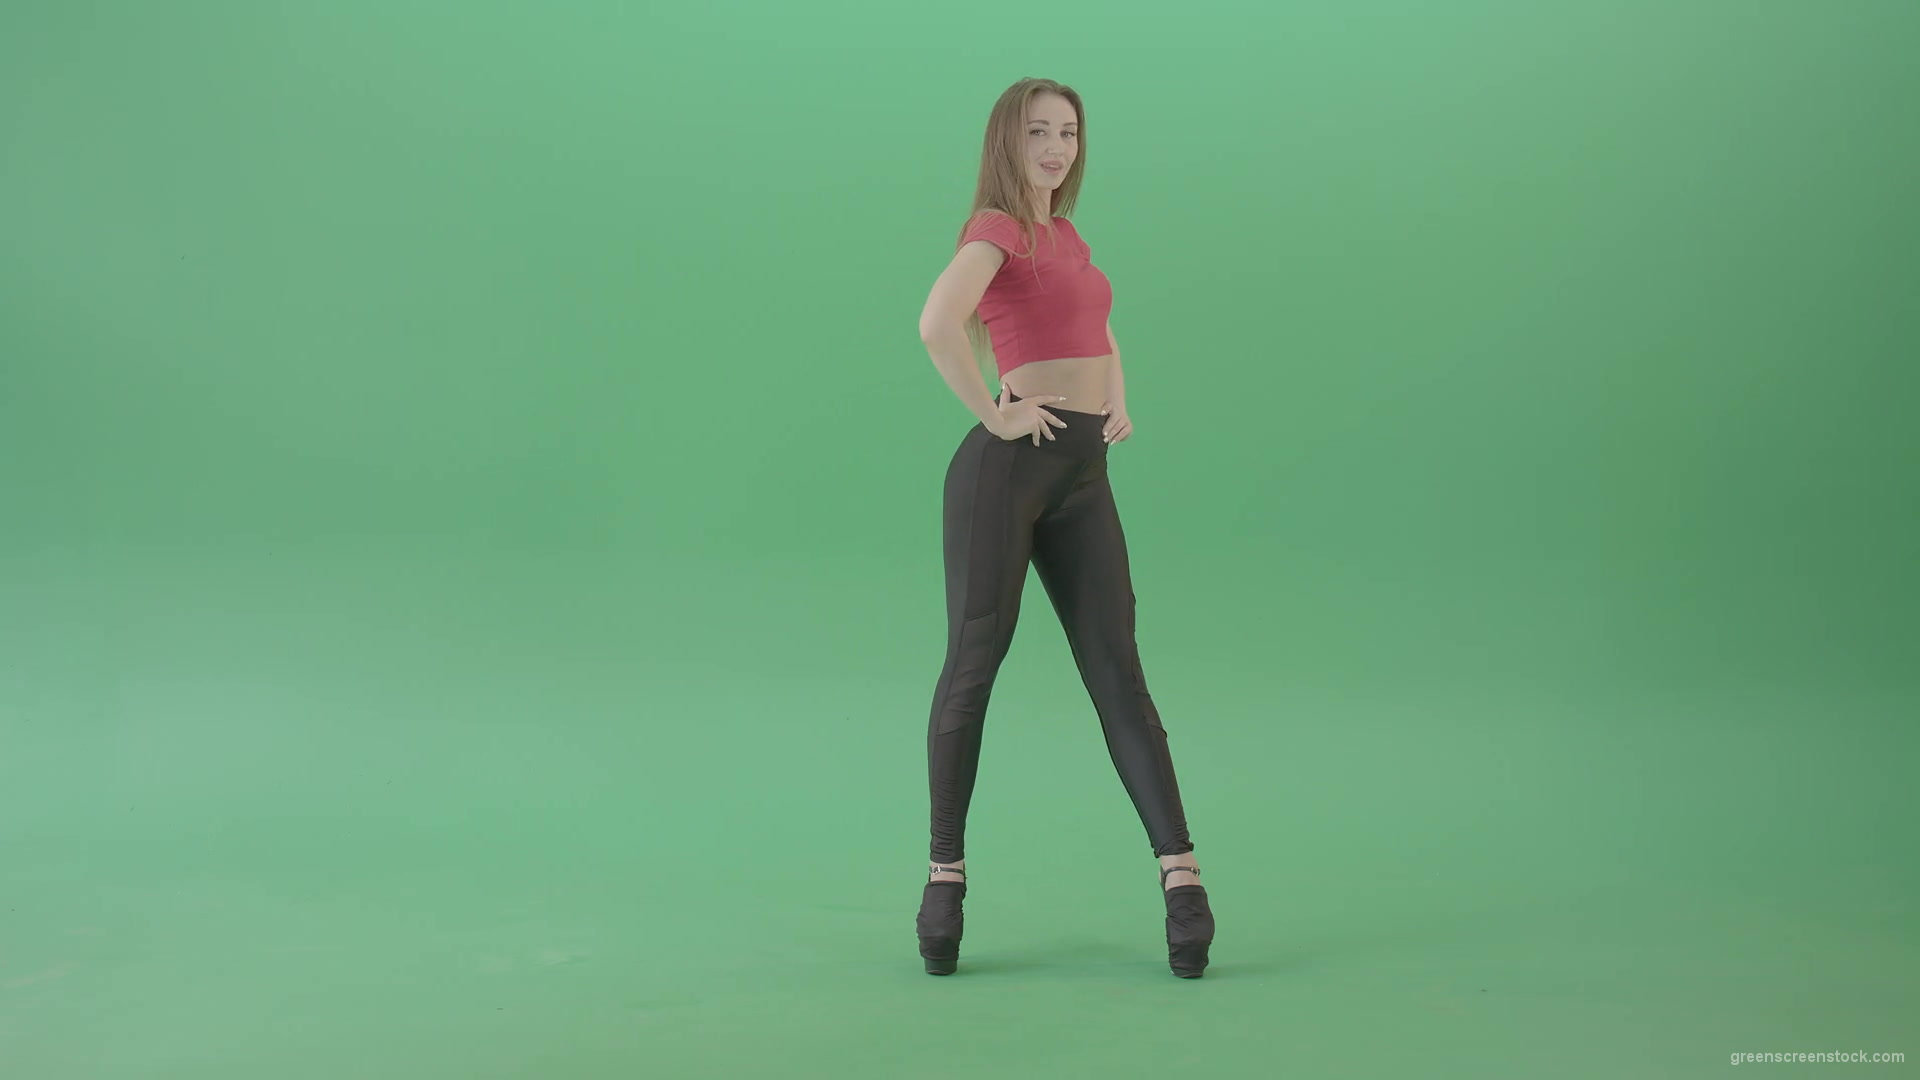 Advertising-Girl-posing-in-front-view-full-size-on-green-screen-4K-Video-Footage-1920_006 Green Screen Stock